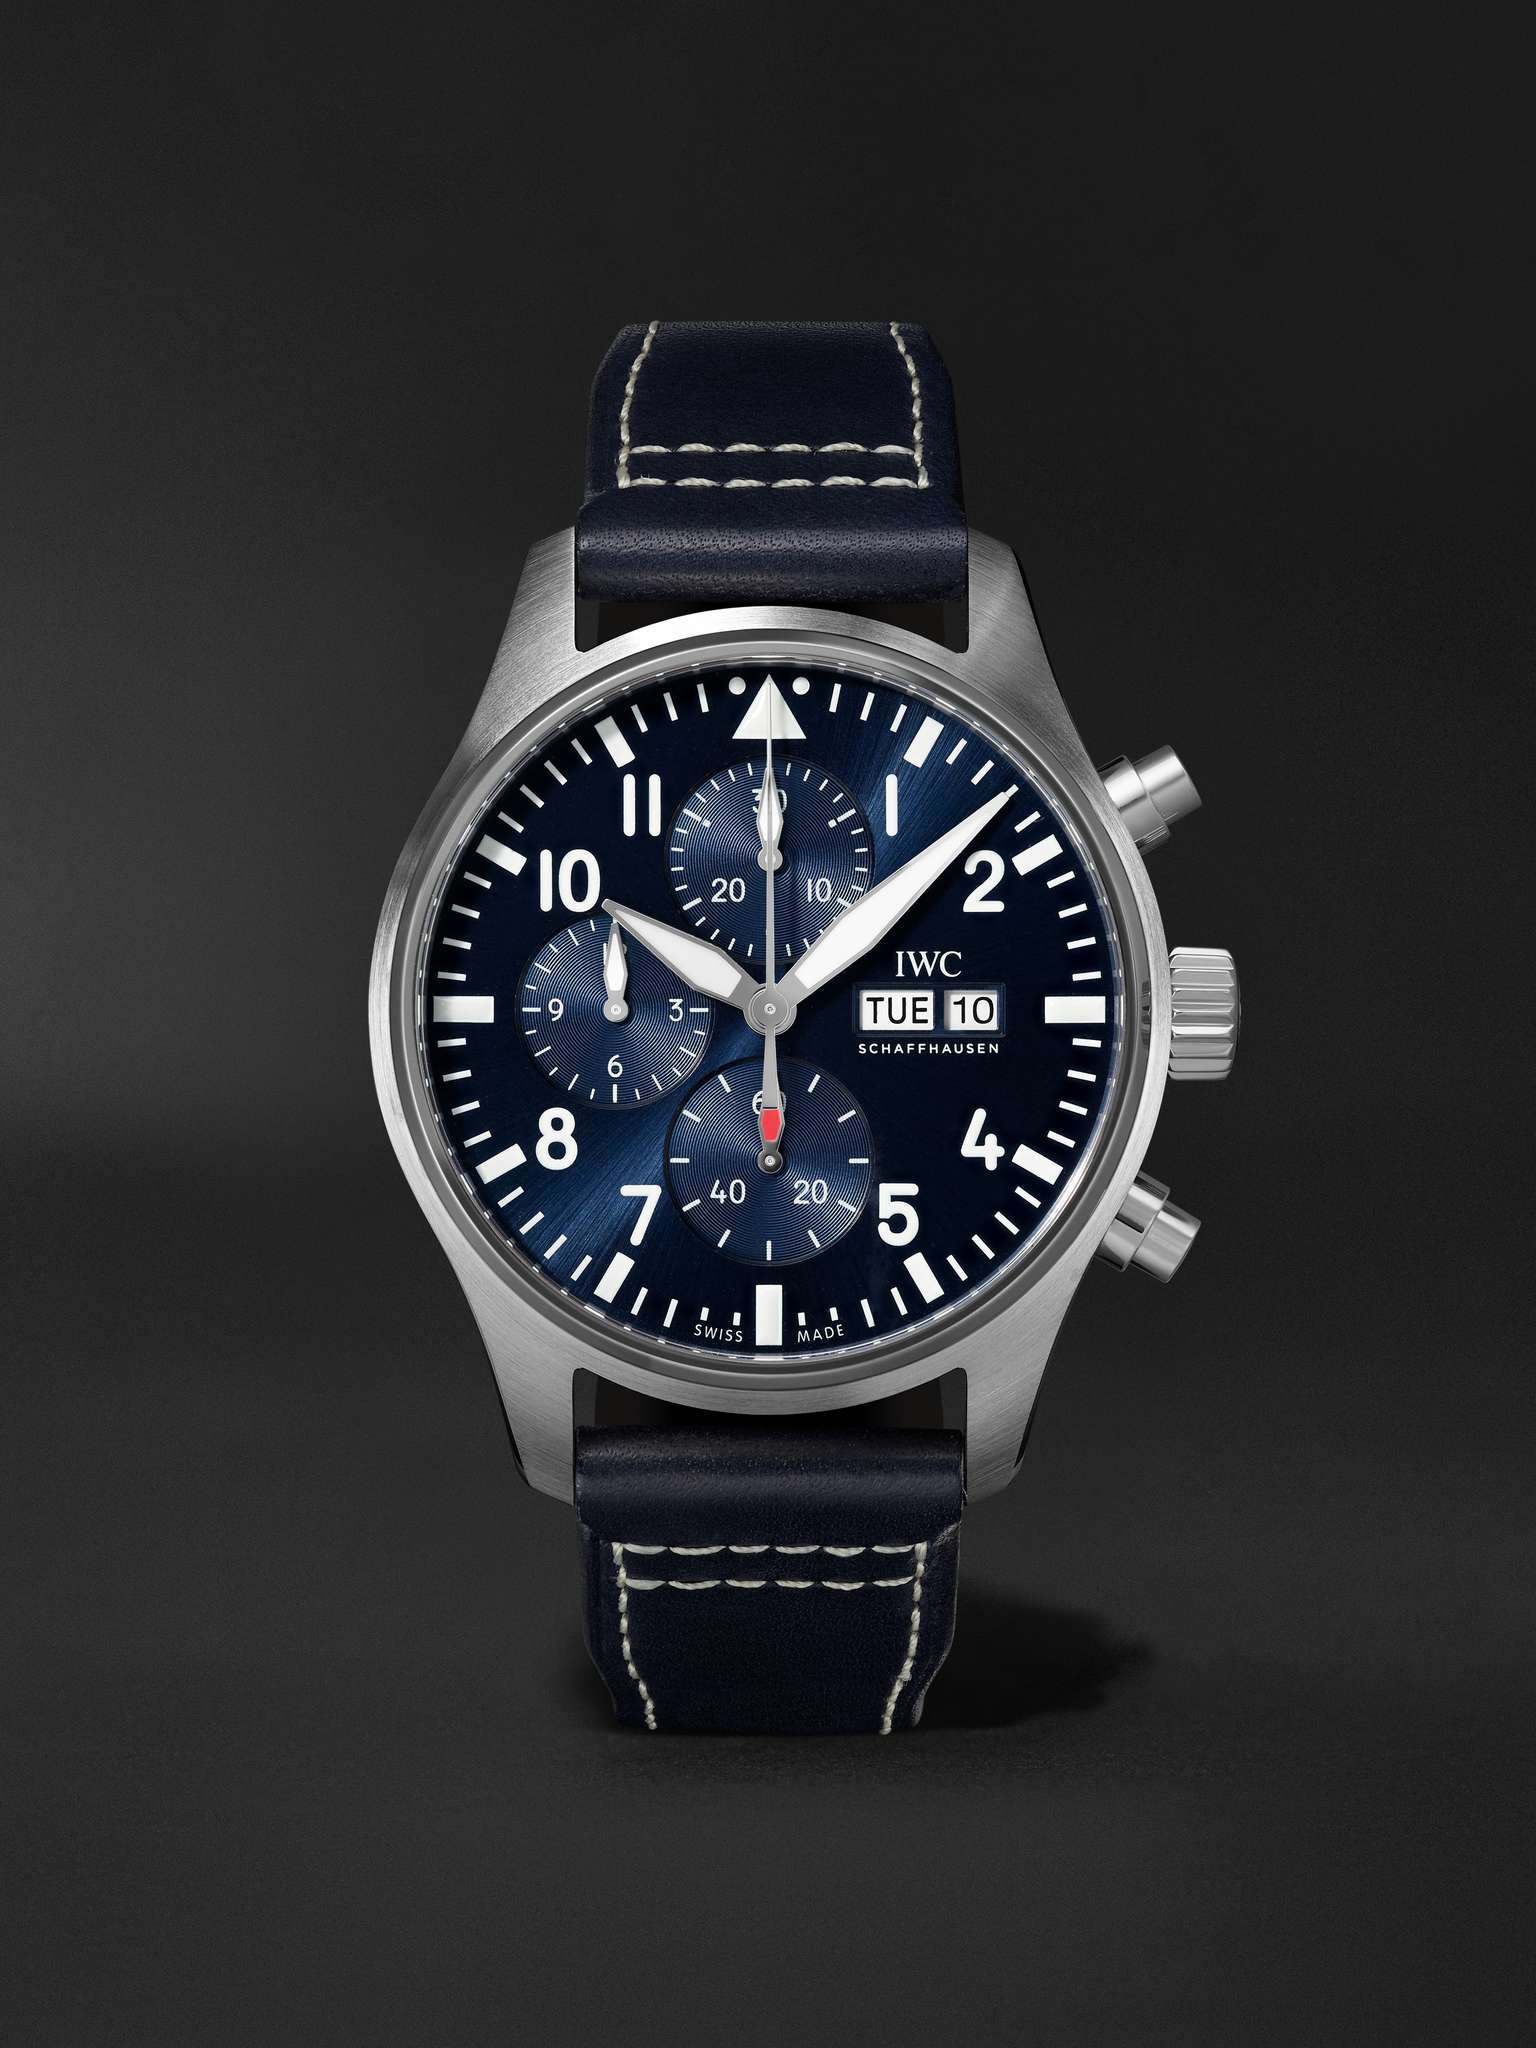 Pilot's Automatic Chronograph 43mm Stainless Steel and Leather Watch, Ref. No. IWIW378003 - 1